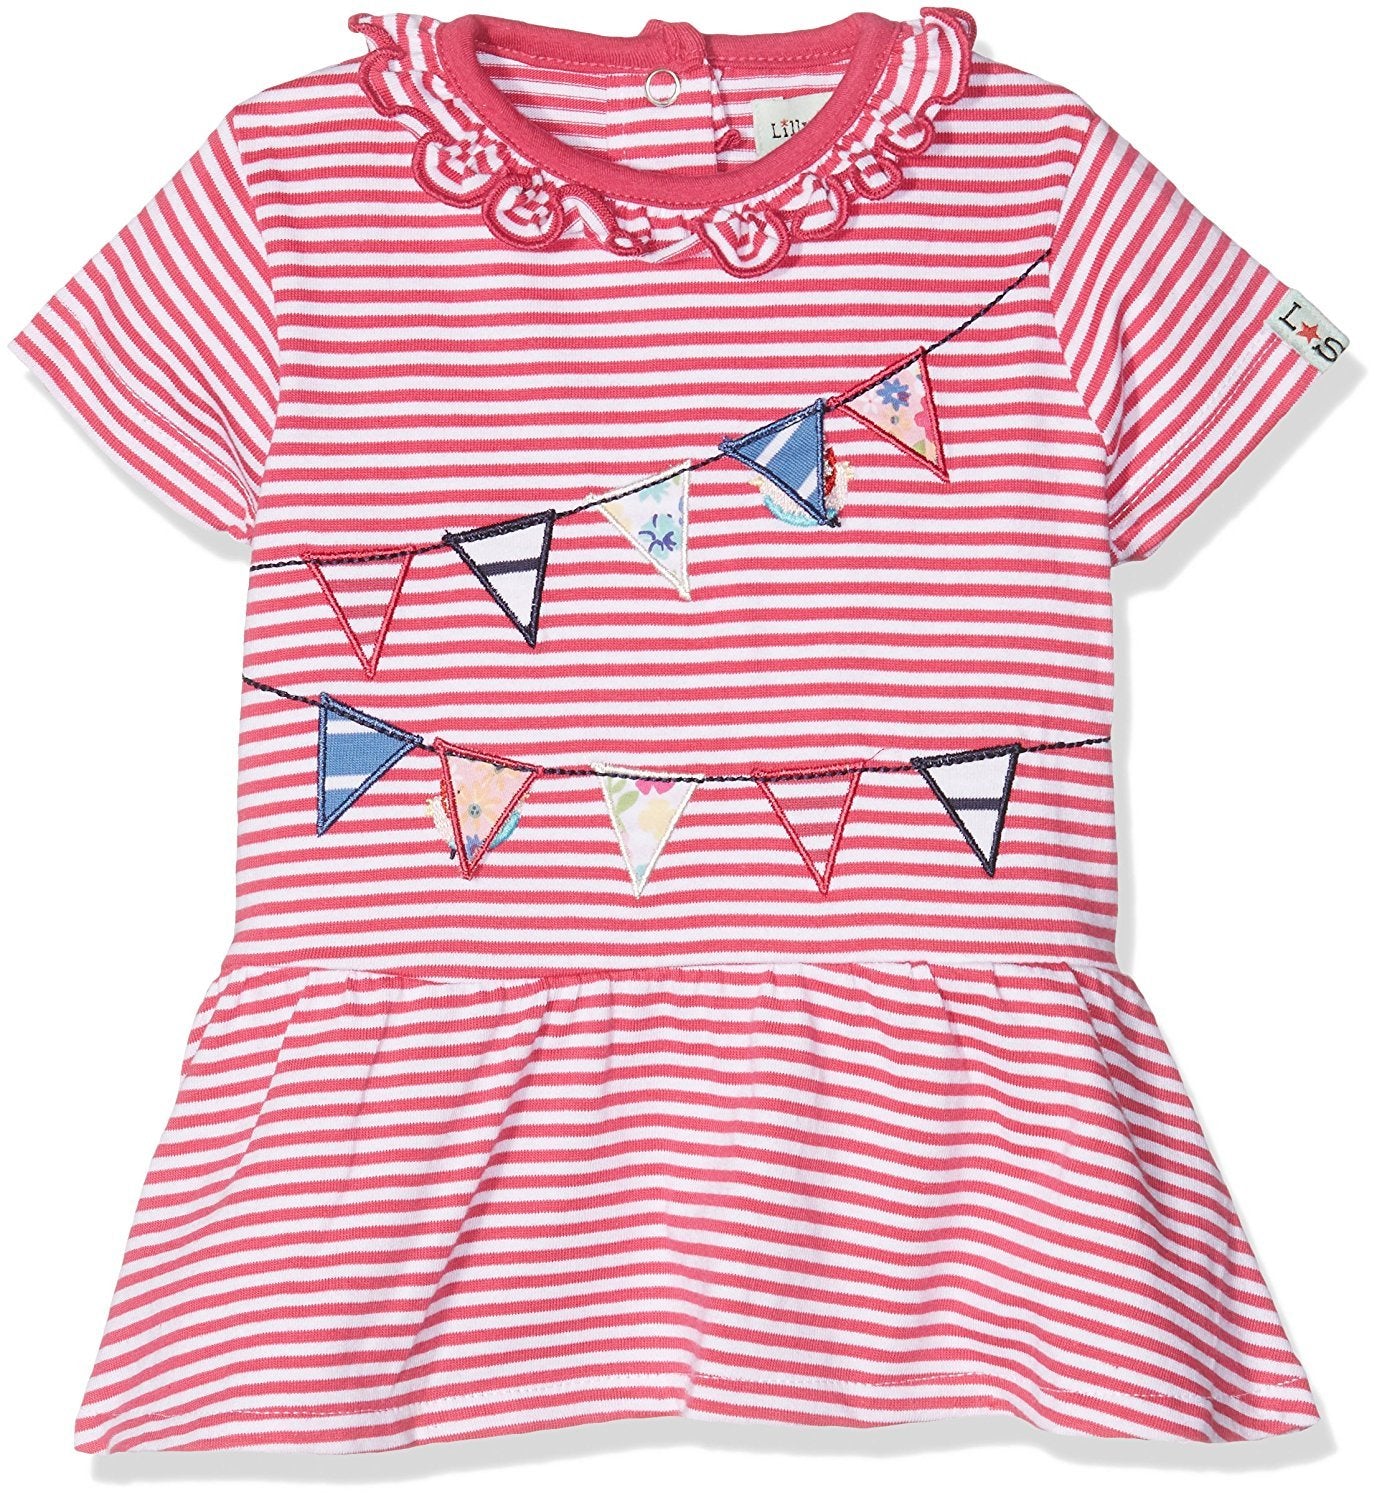 Lilly and Sid Surprise Applique Jersey Bunting Stripe Dress - Stockpoint Apparel Outlet